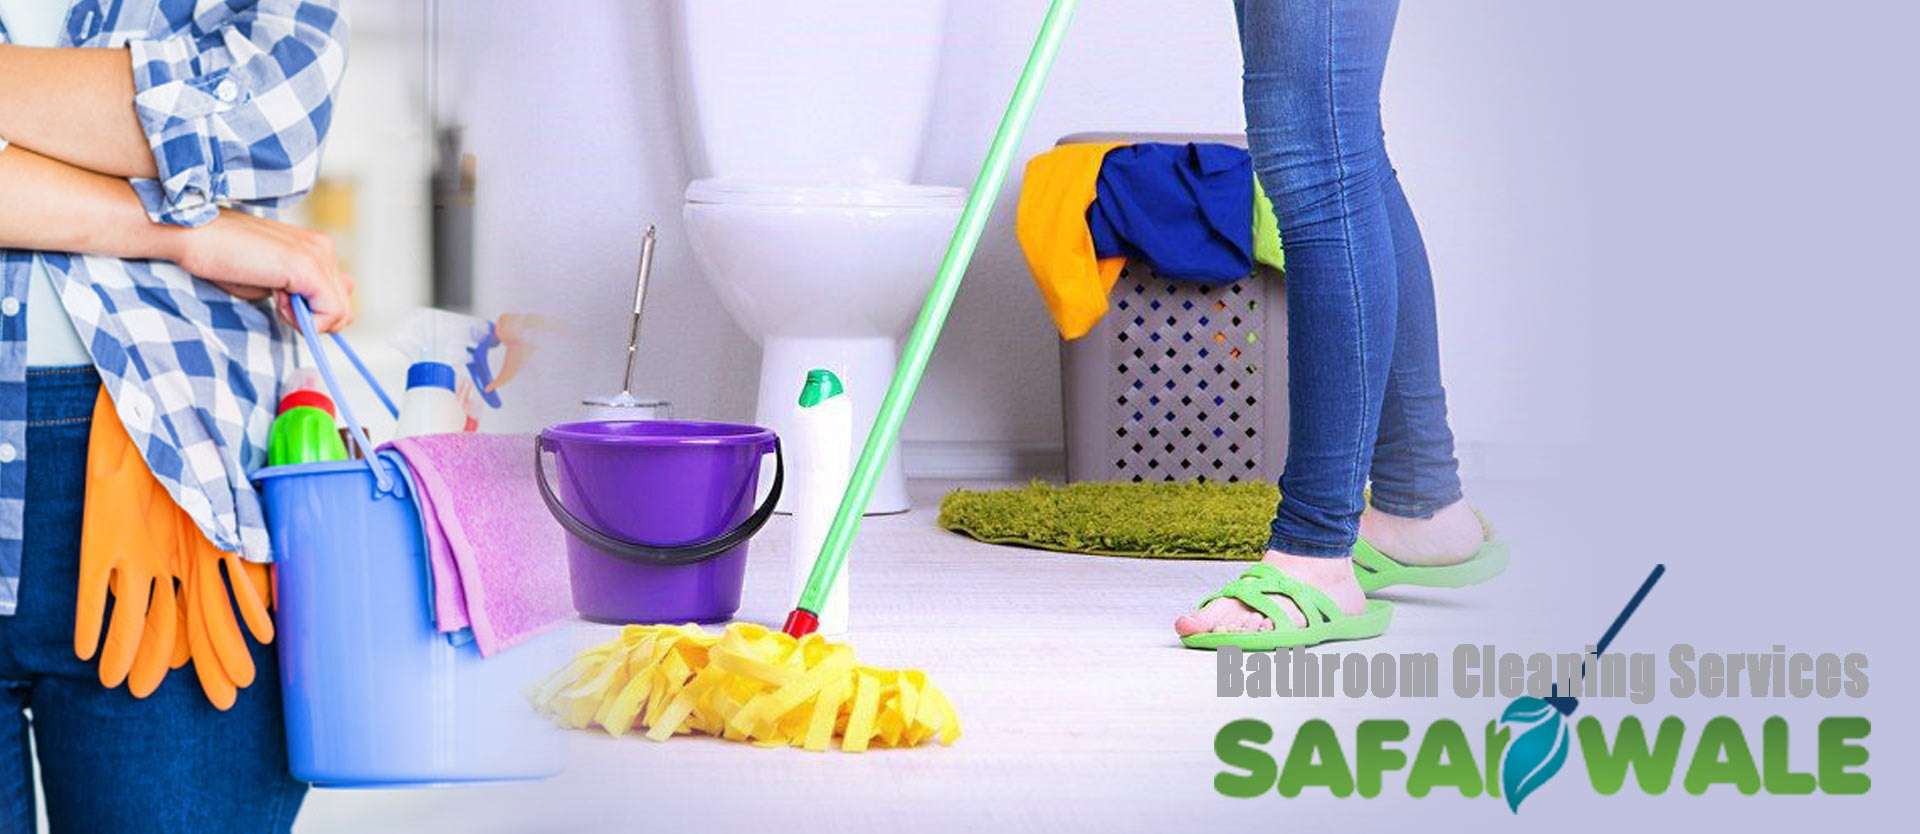 Bathroom Cleaning Services In Shyam Park Extension, Ghaziabad